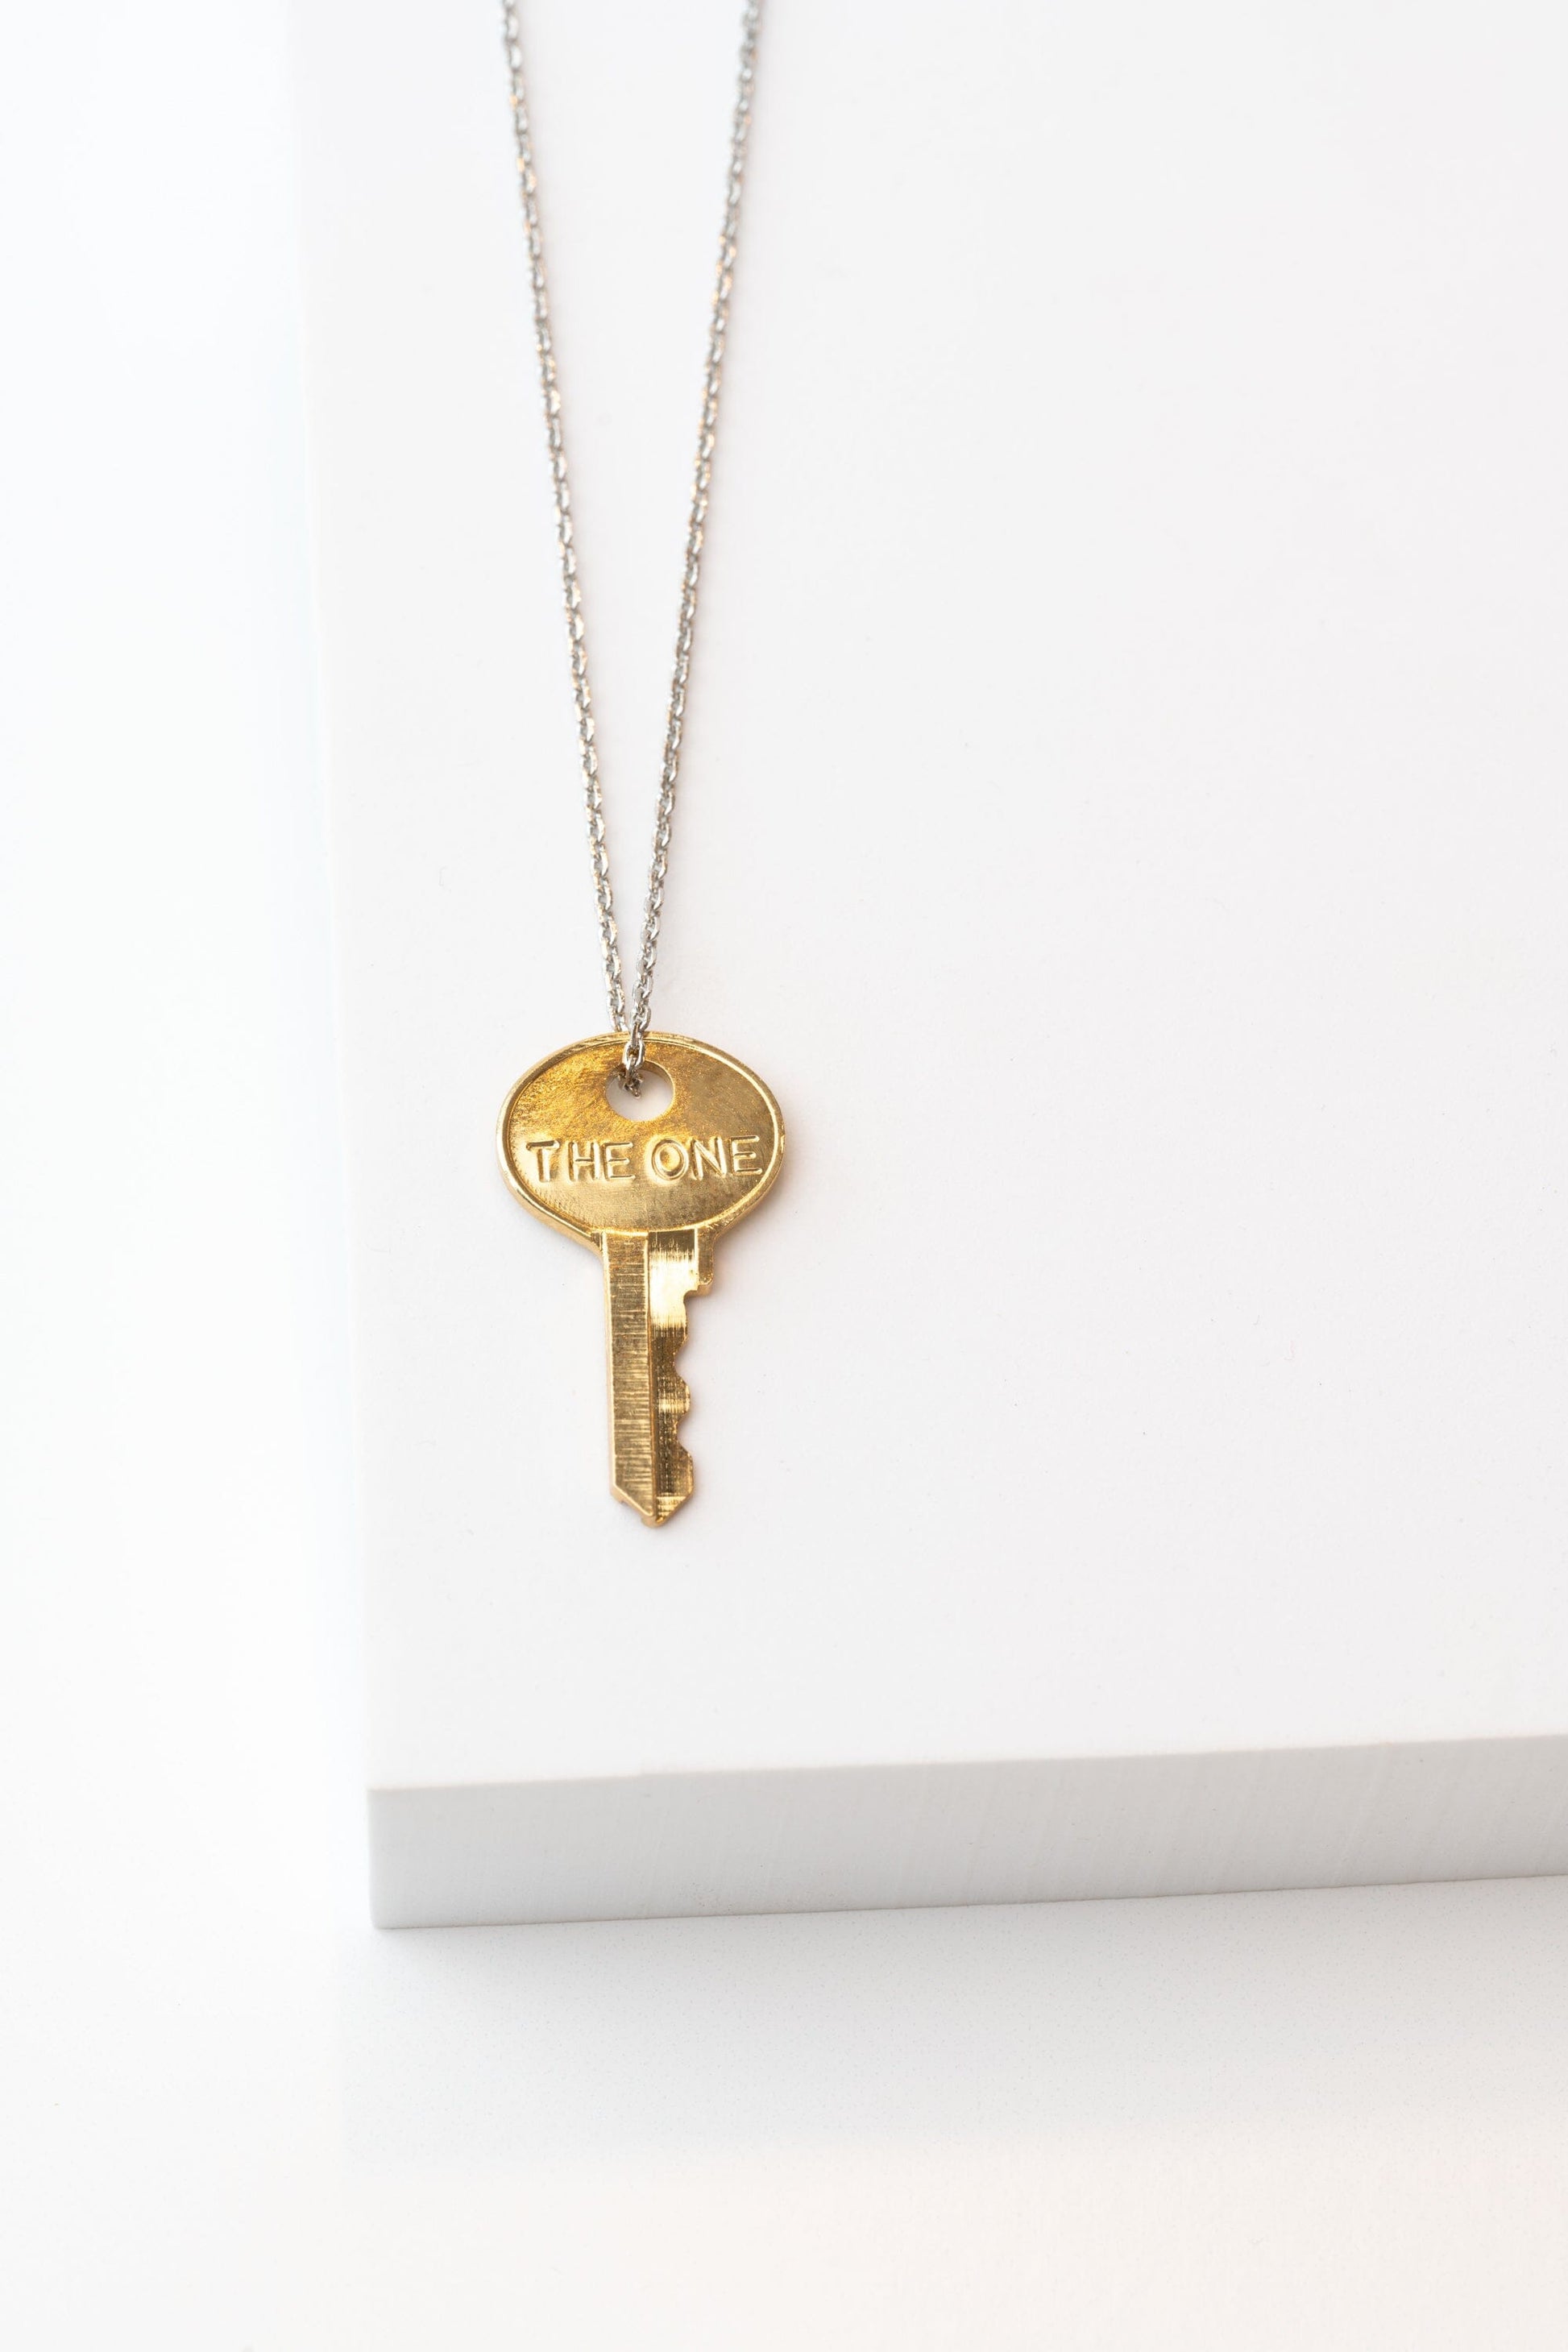 THE ONE Dainty Key Necklace Necklaces The Giving Keys Dainty Silver 